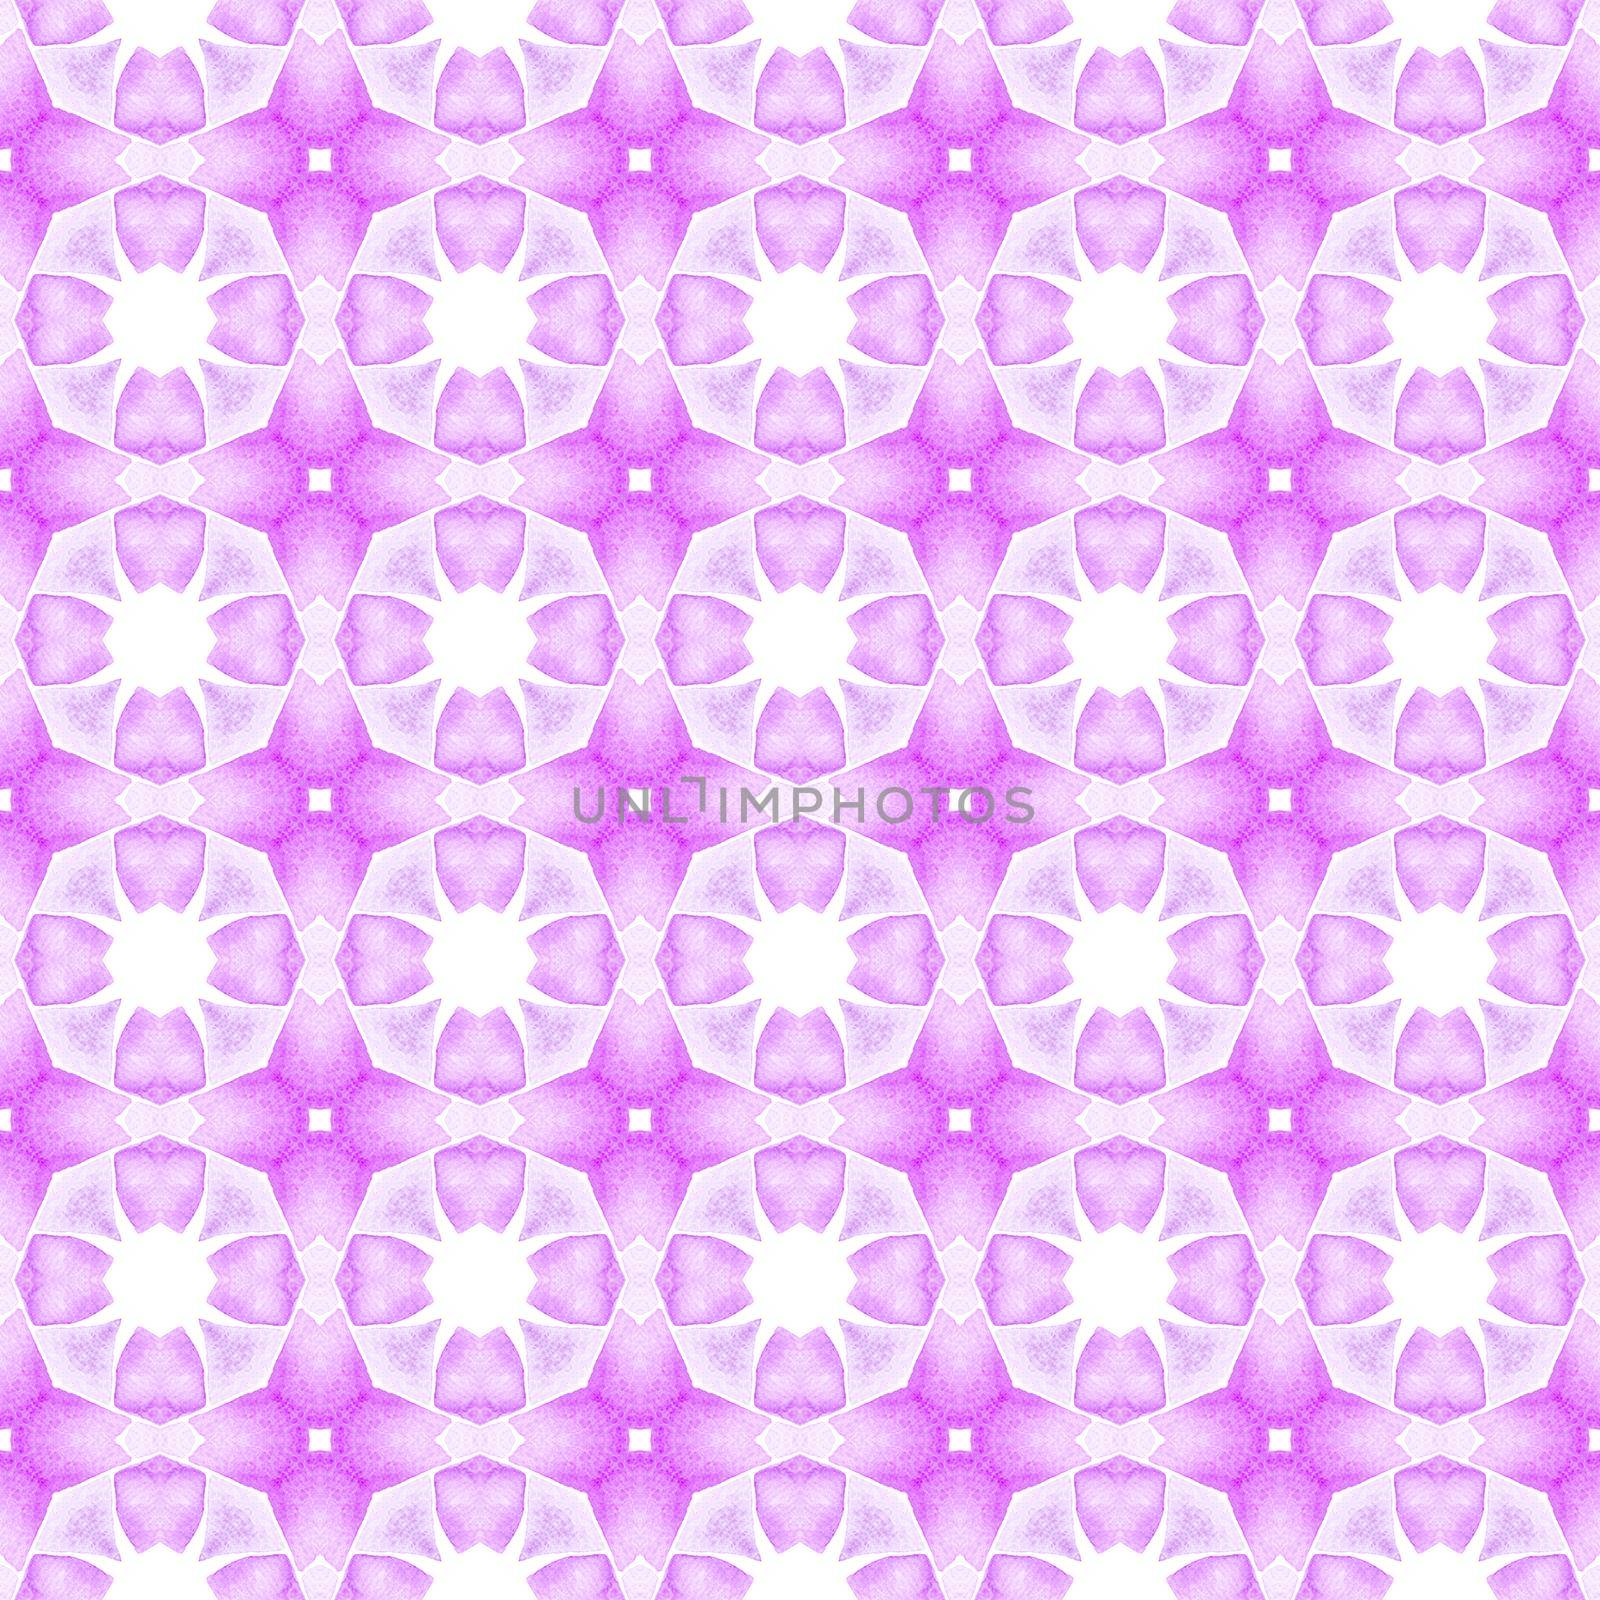 Ethnic hand painted pattern. Purple vibrant boho chic summer design. Watercolor summer ethnic border pattern. Textile ready decent print, swimwear fabric, wallpaper, wrapping.